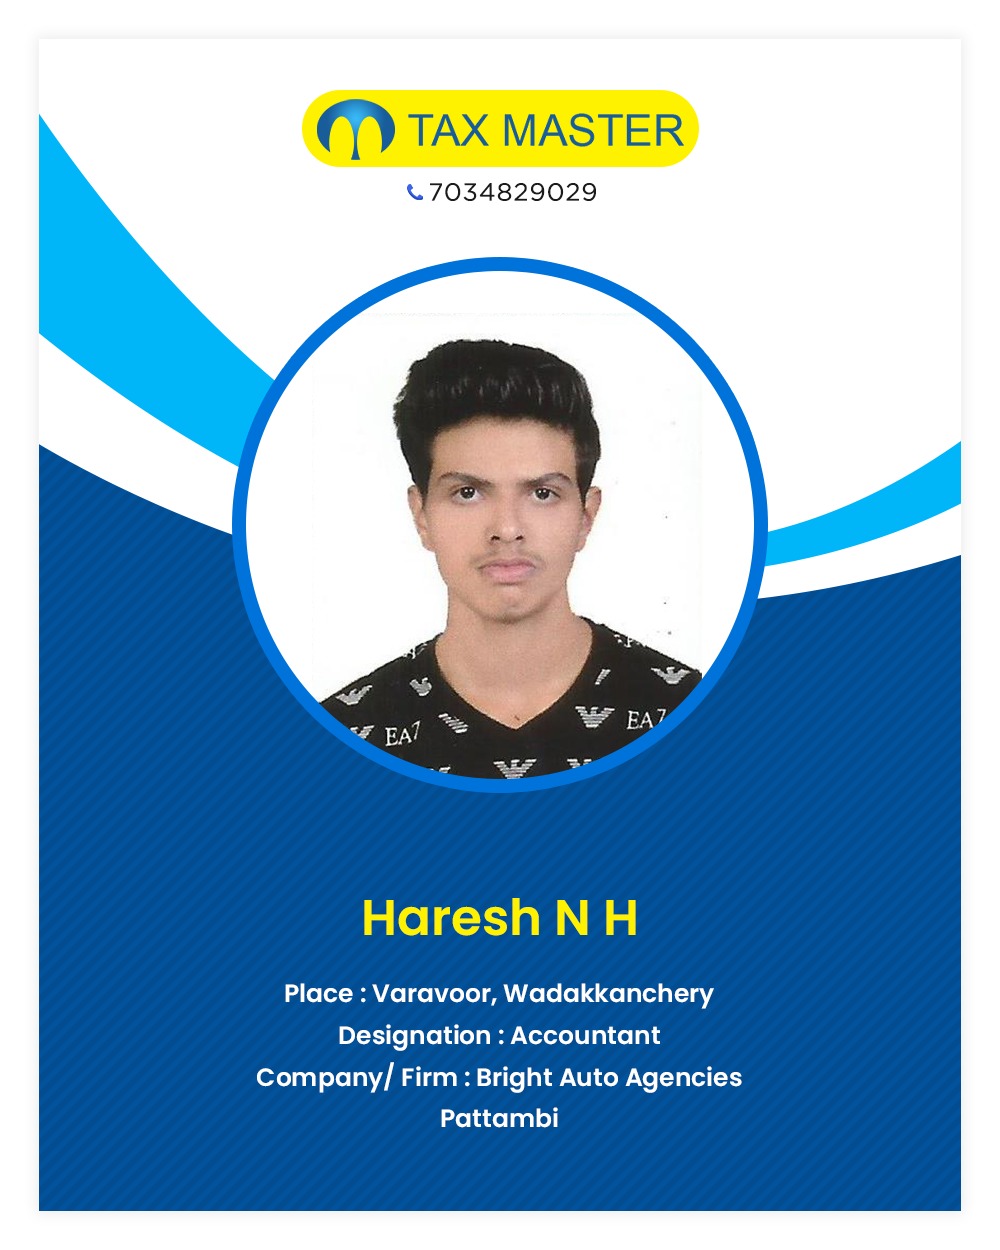 Haresh gst filing course